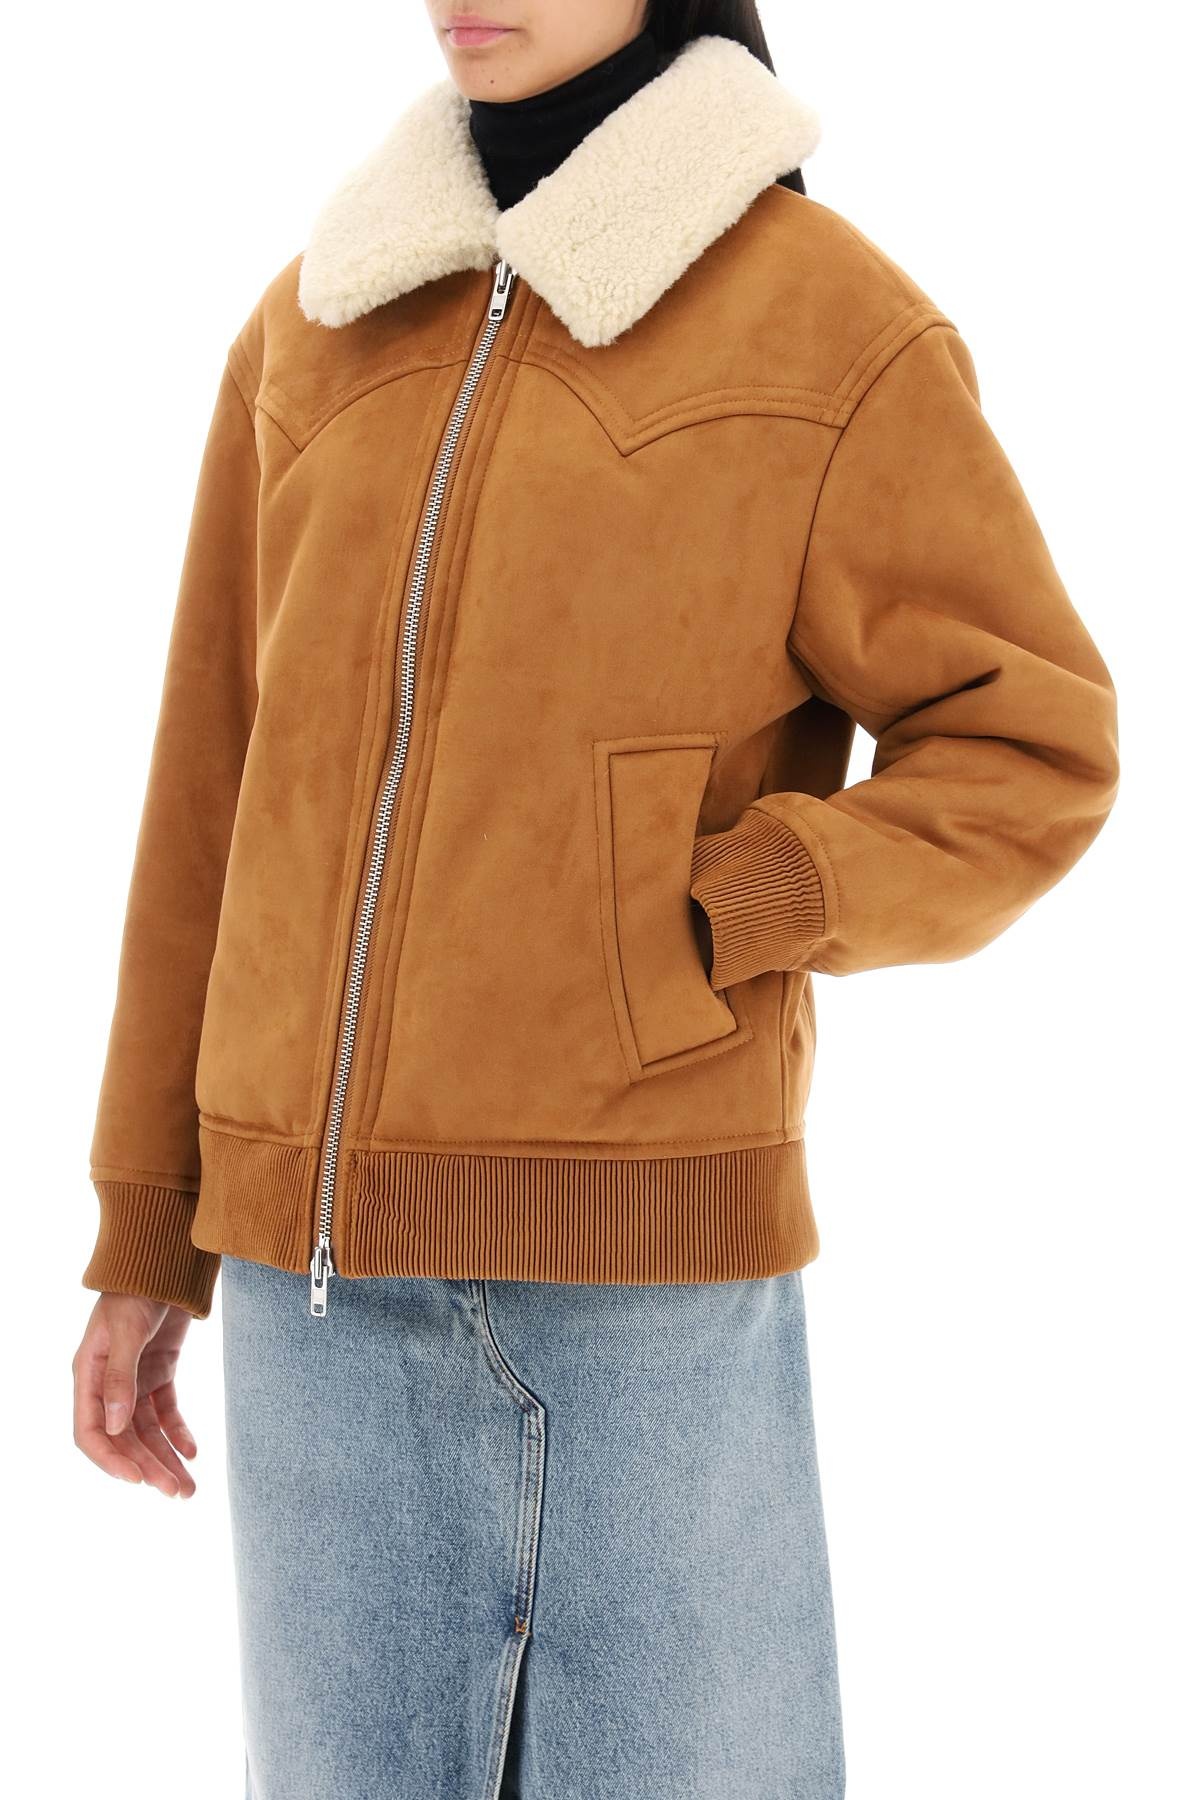 Stand Studio Lillee Eco-Shearling Bomber Jacket Women - 4